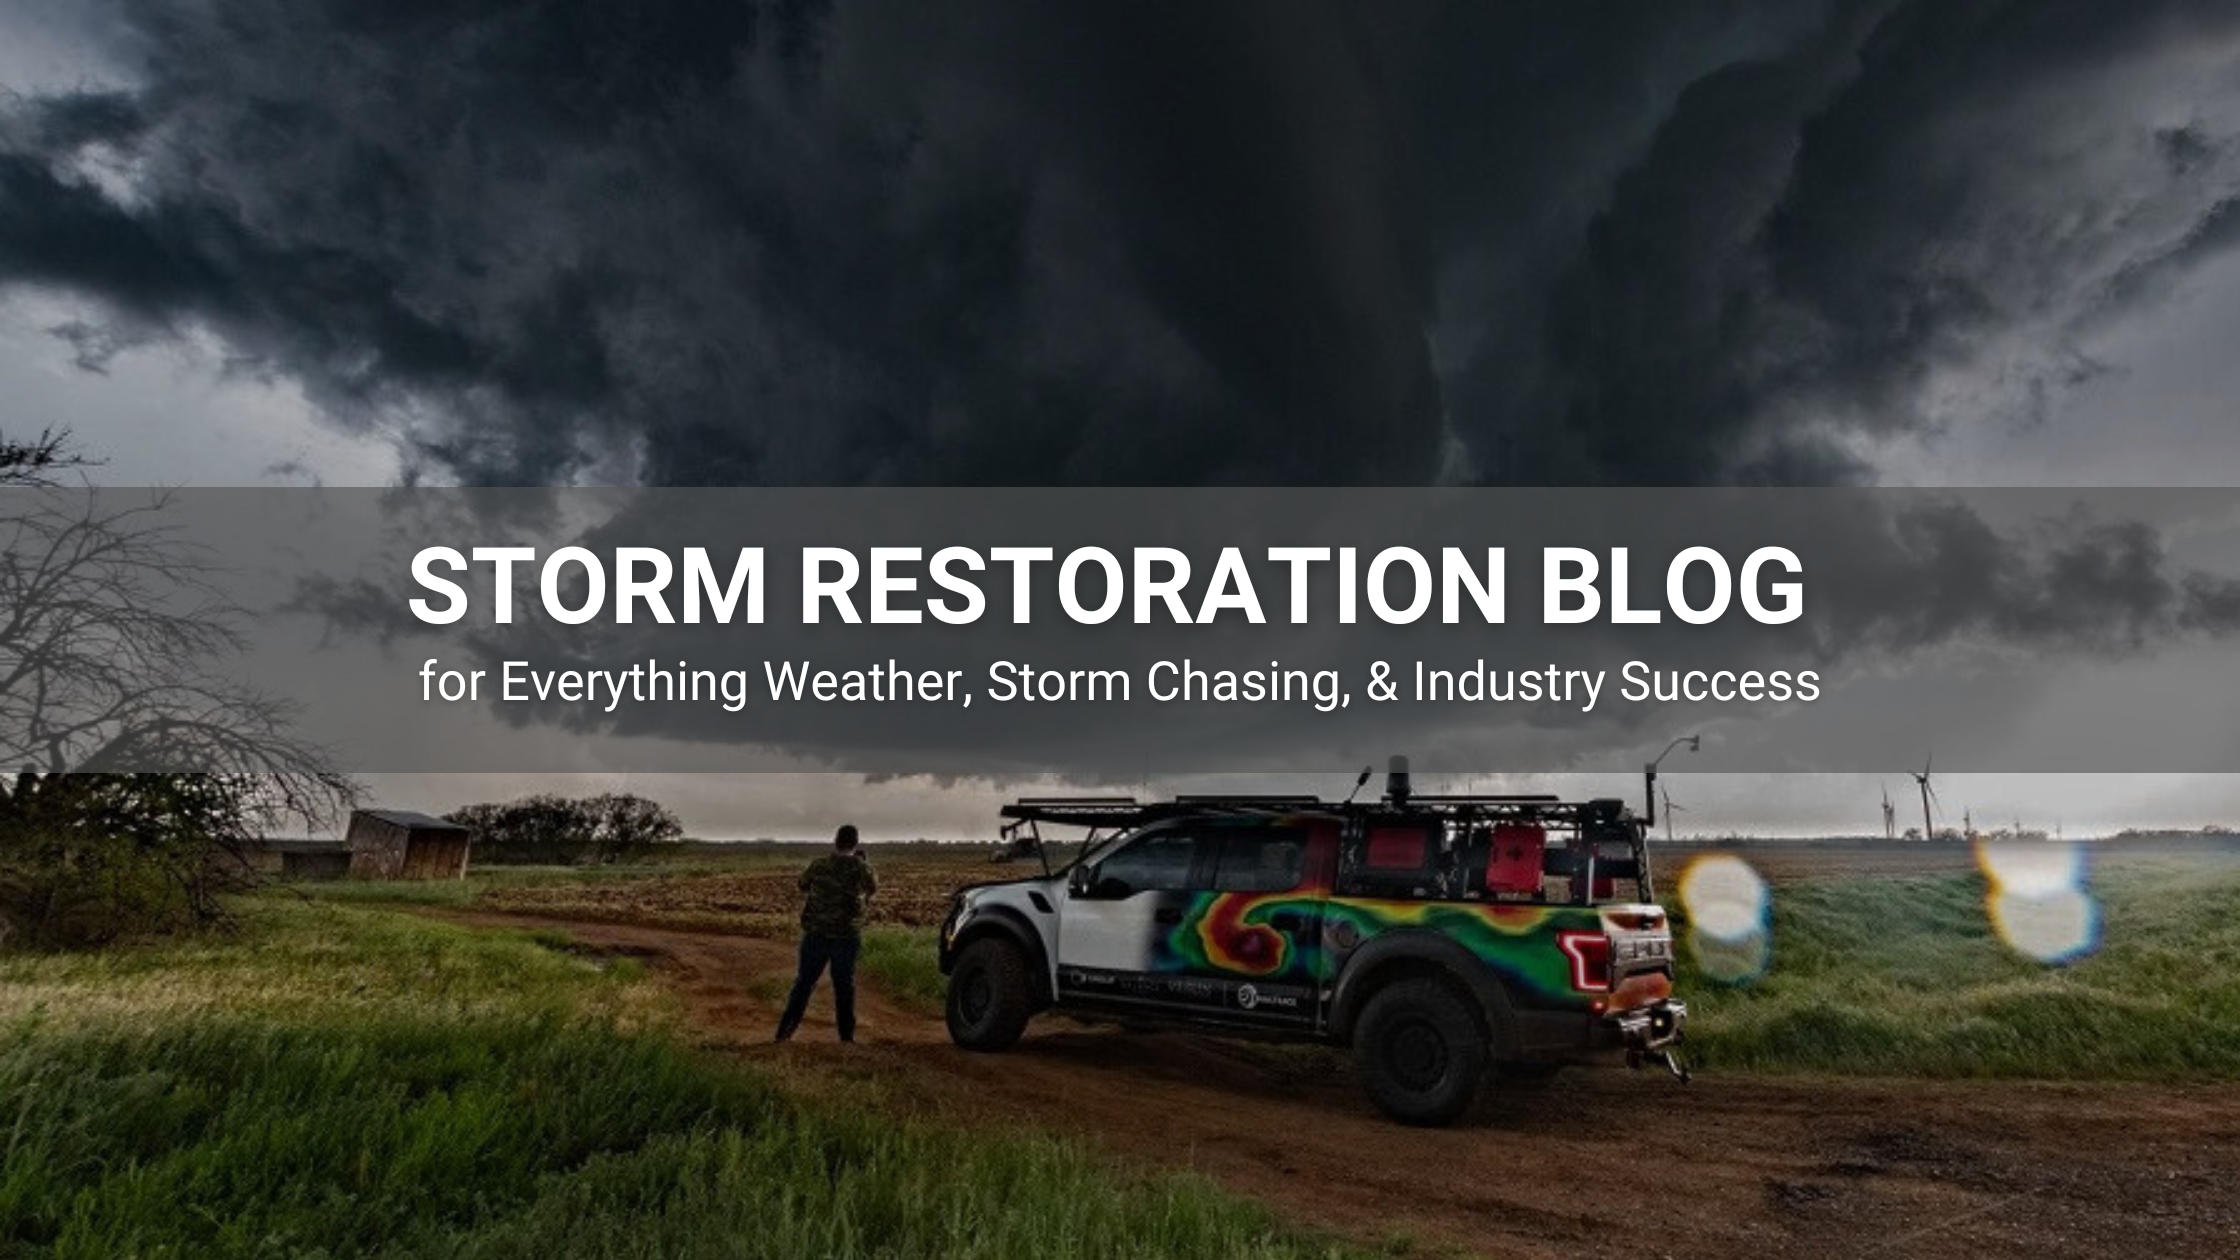 Storm Restoration Blog: Weather, Storm Chasing, & Industry Tips